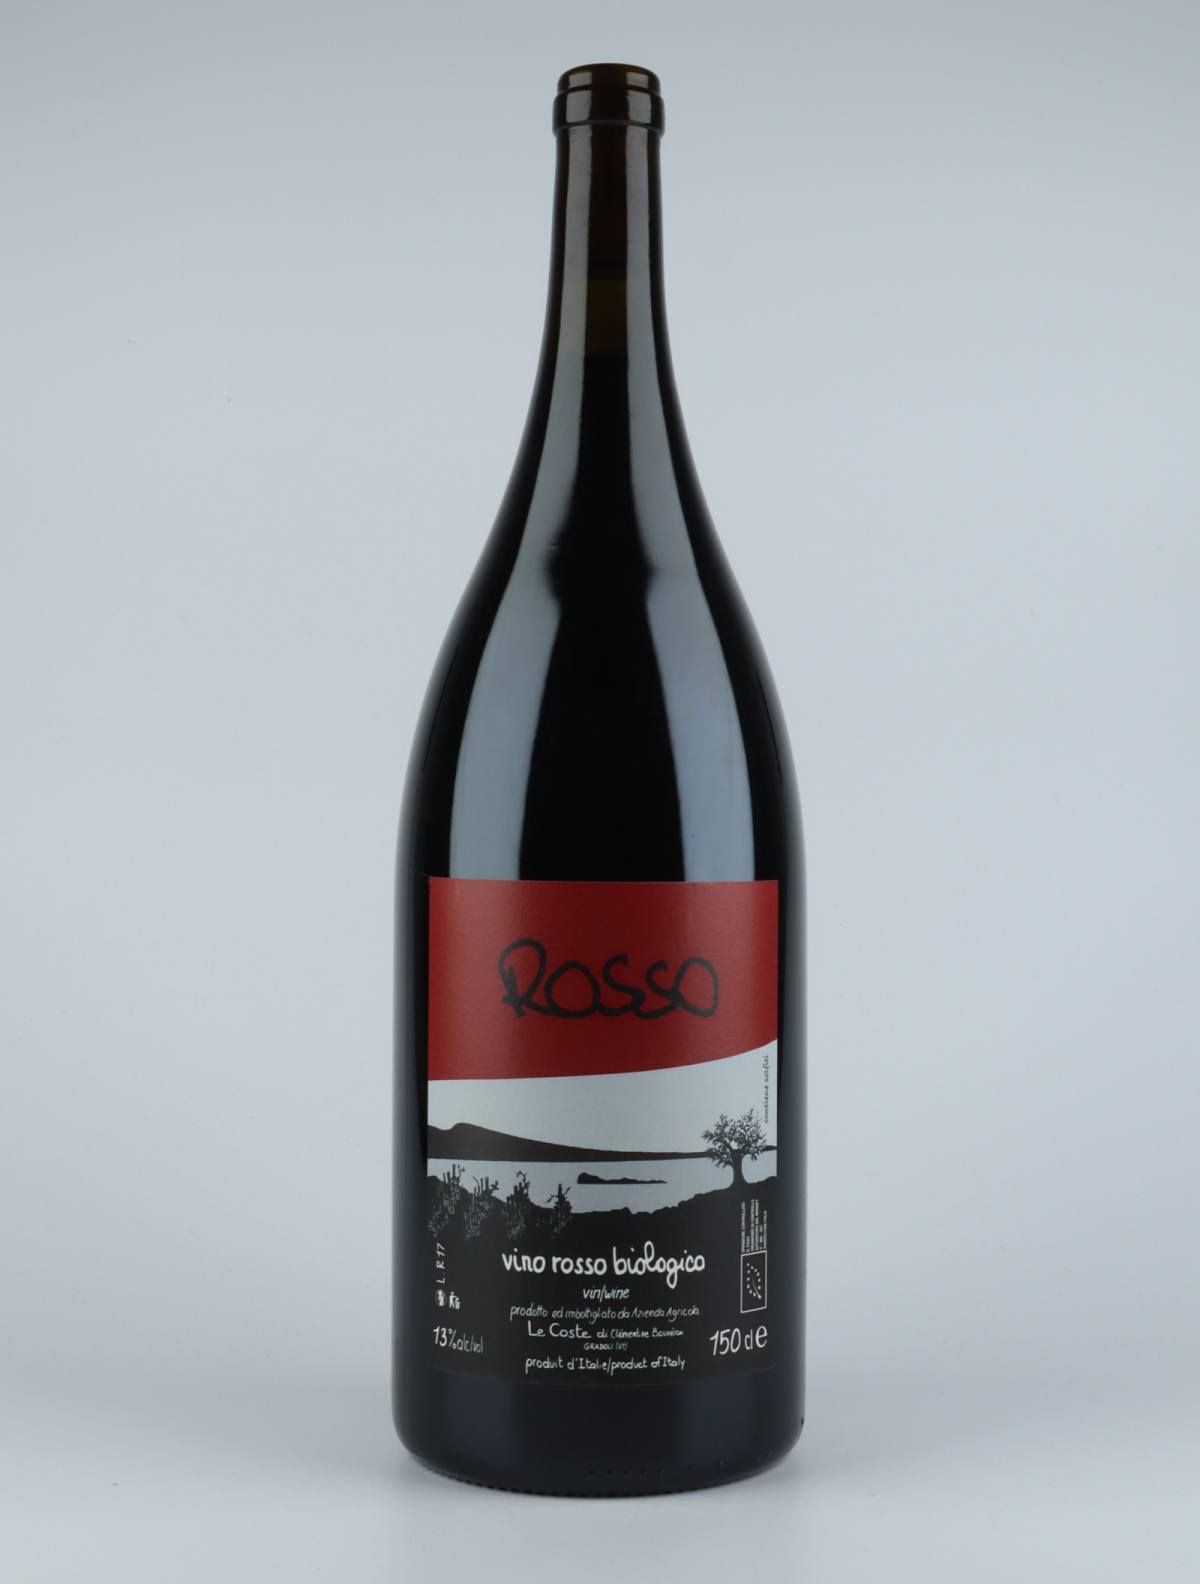 A bottle 2017 Rosso Red wine from Le Coste, Lazio in Italy